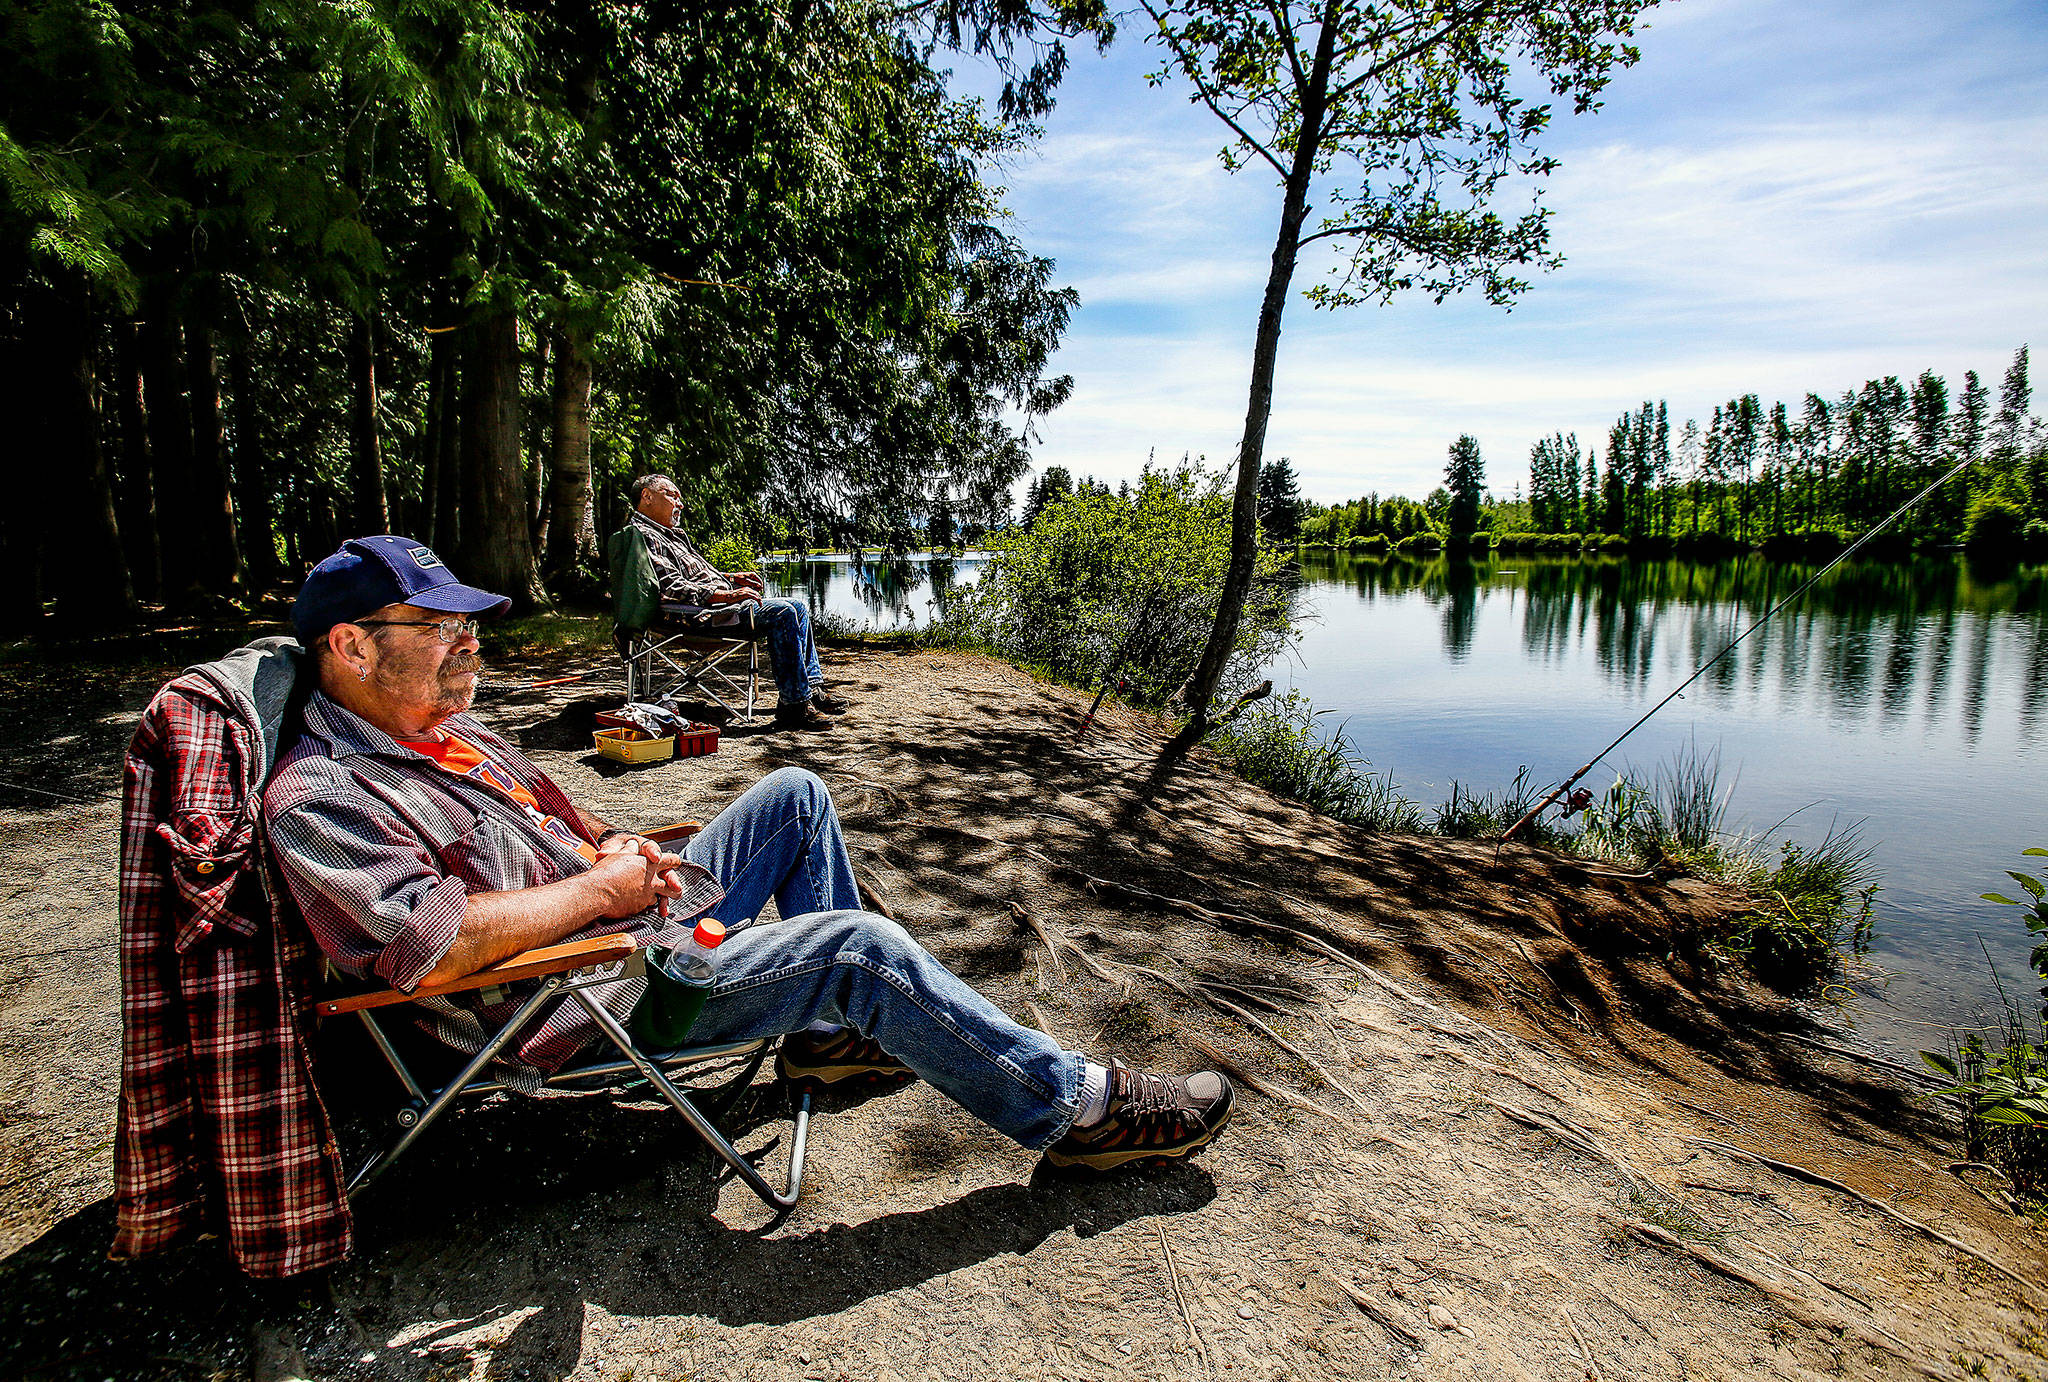 E.J. Silva, 57, foreground, and Clinton Jones, 69, both of Marysville, relax in lawn chairs and enjoy a little fishing Wednesday at the South Lake of Gissberg Twin Lakes county park, which is open year-round to all legal anglers. A $5 parking fee will be required there June 15 through Labor Day. (Dan Bates / The Herald)